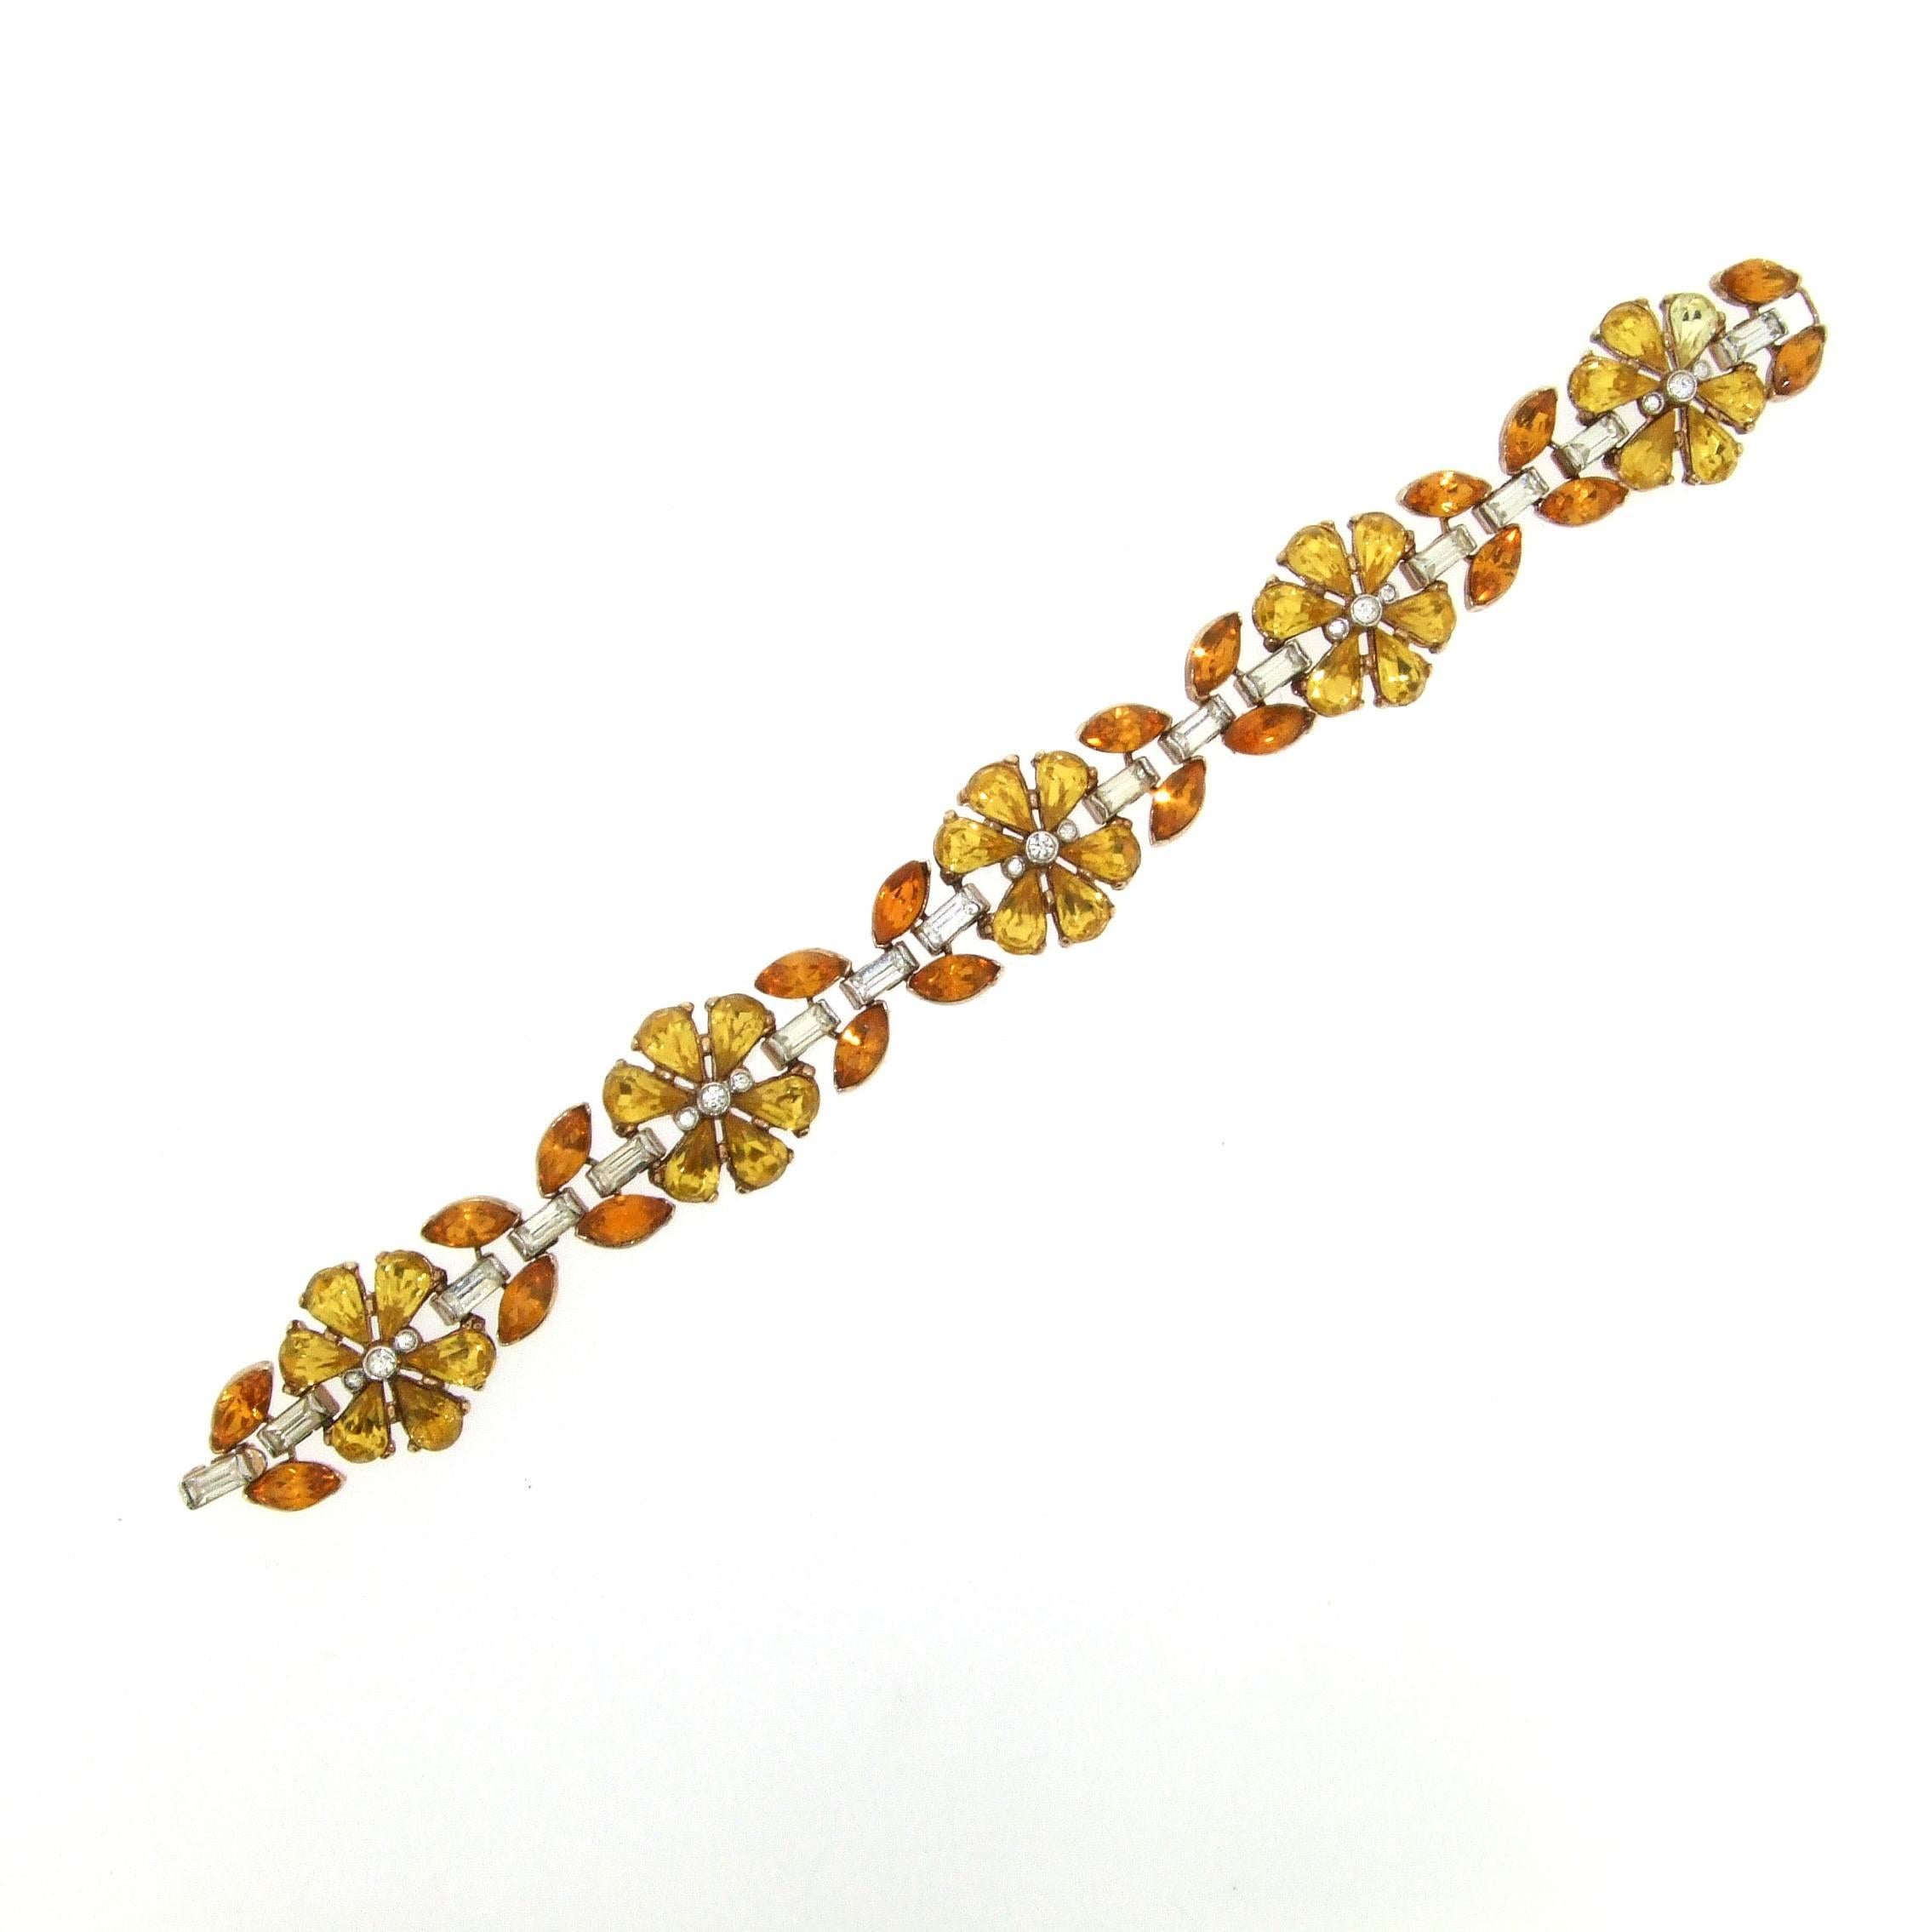 A beautiful floral two tone yellow citrine effect crystal bracelet by Trfari accentuated with clear baguette stones. 

Trifari was founded in the USA by Italian Gustavo Trifari in 1910. Chief designer of Trifari between 1930 and 1968 was Alfred